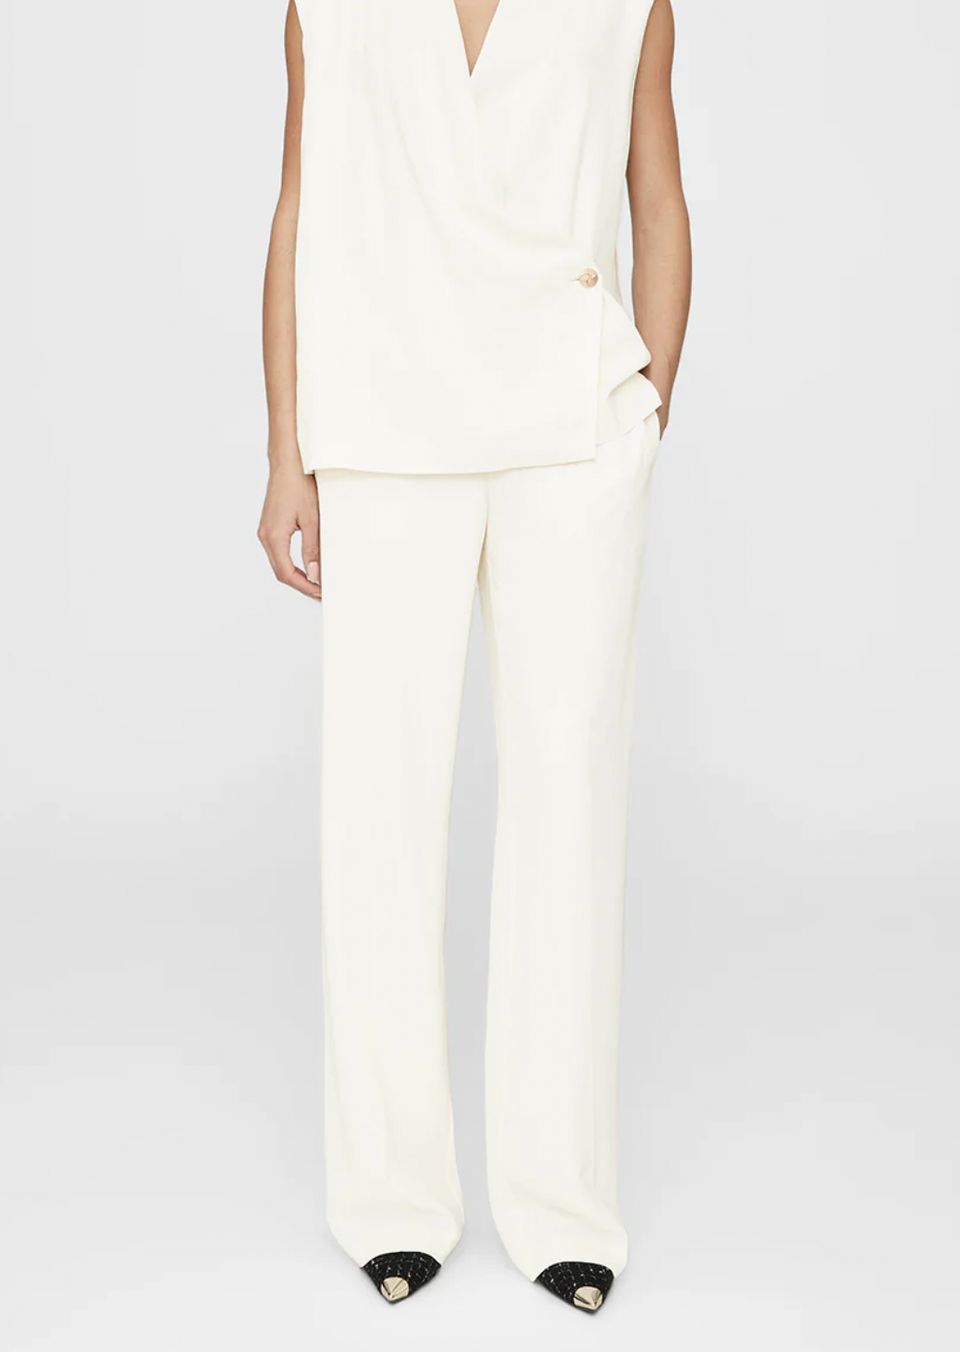 The Anine Bing Soto Pant in Ivory